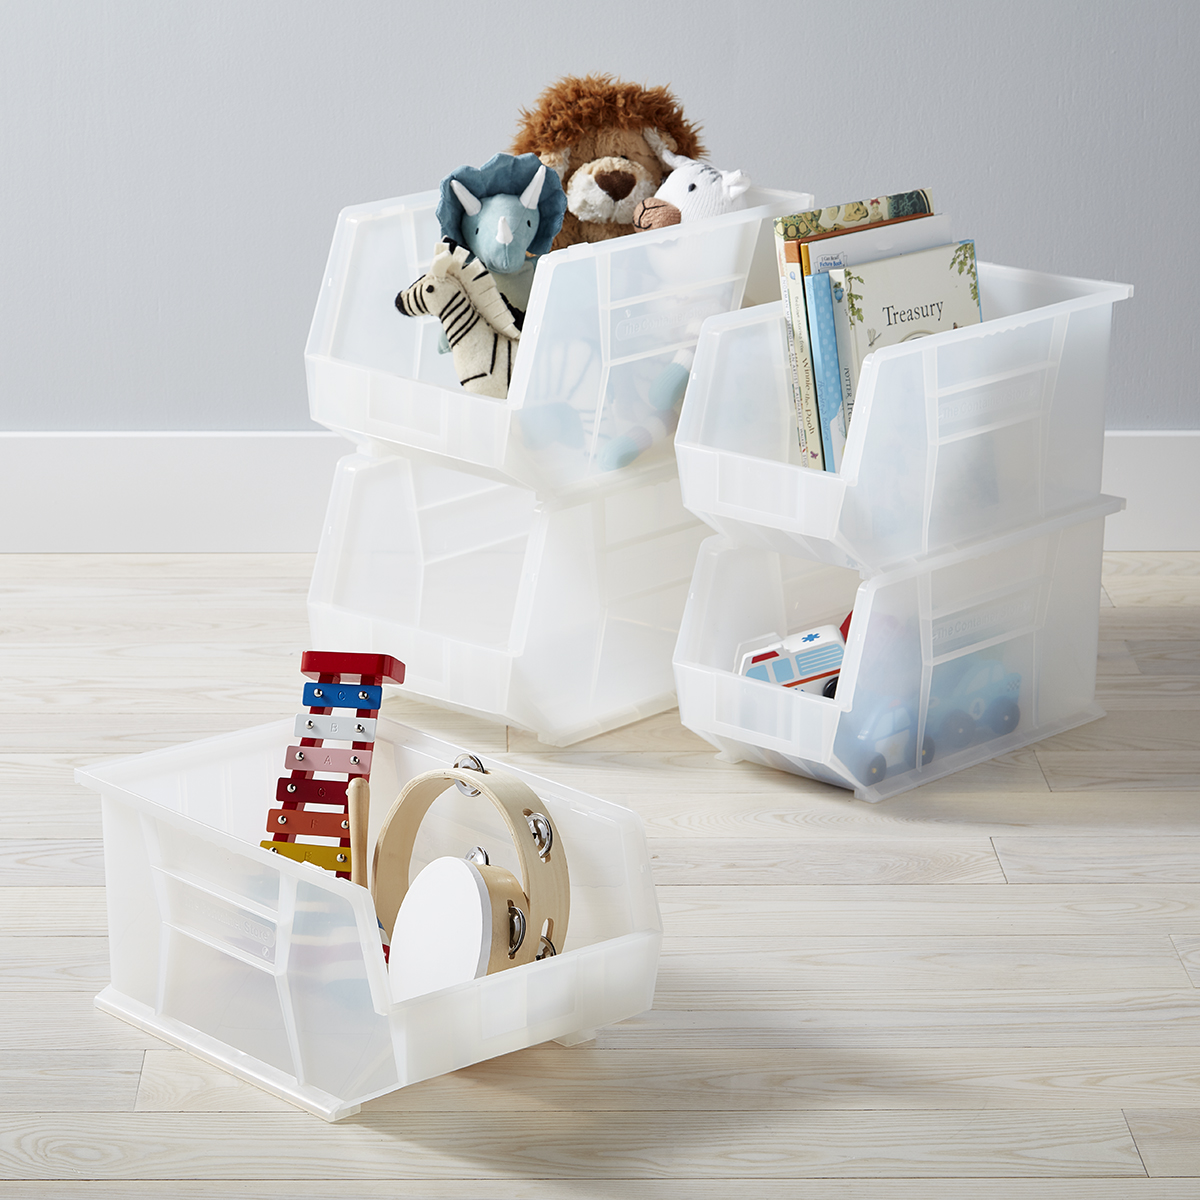 https://www.containerstore.com/catalogimages/382223/Storage-Utility-Bins-Collection.jpg